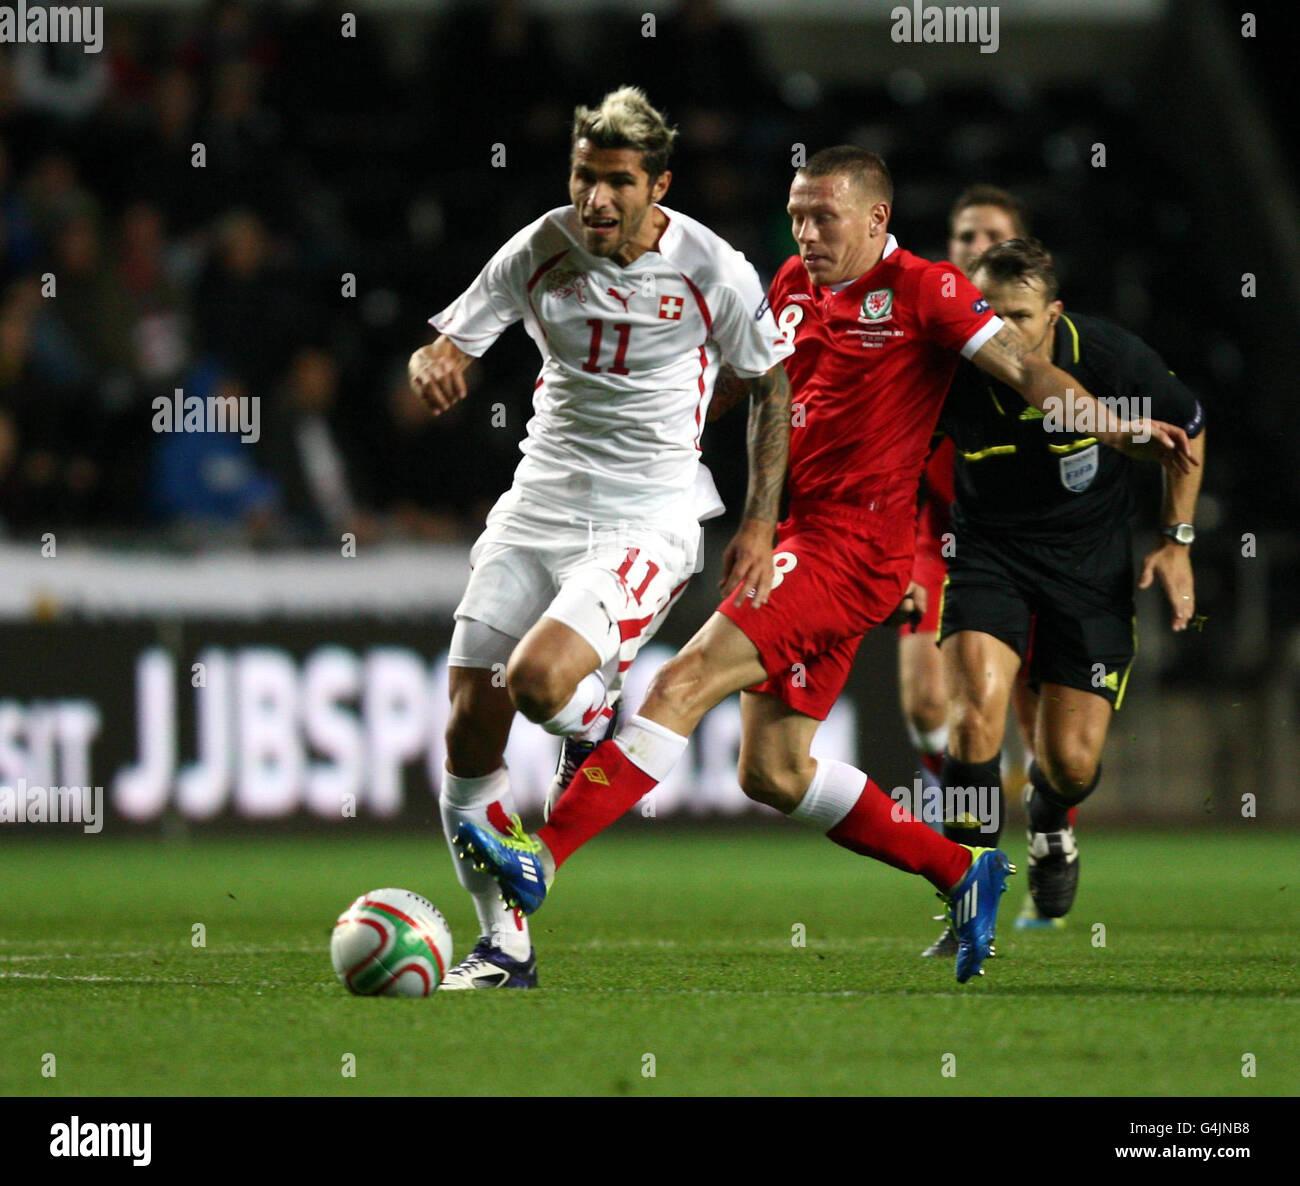 Switzerland's Valon Behrami is challenged by Wales' Craig Bellamy during the Euro 2012 Group G Qualifying match at the Liberty Stadium, Swansea. Stock Photo